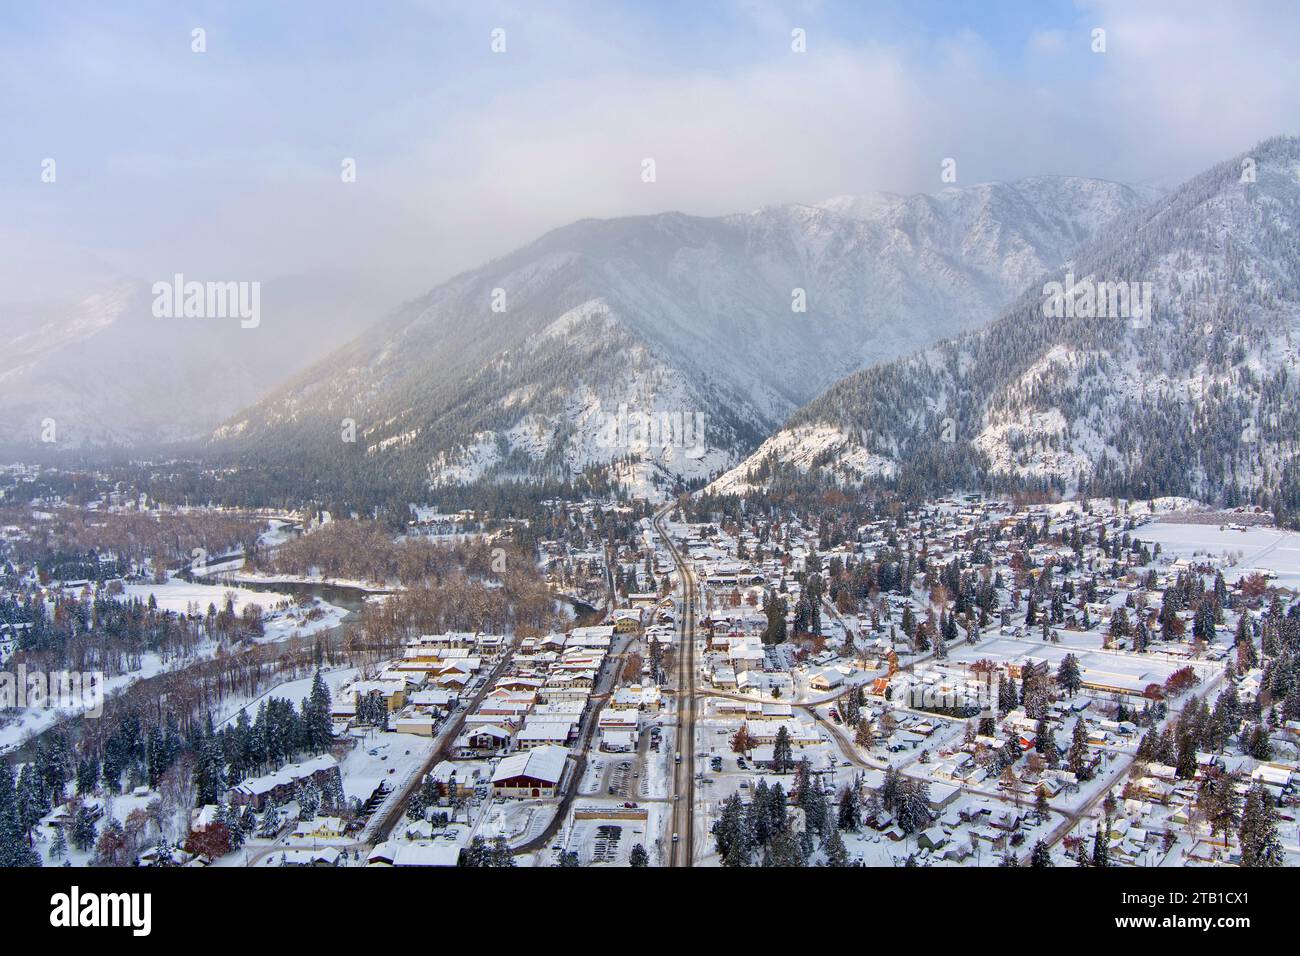 Aerial view of Leavenworth, Washington at sunrise in December Stock Photo